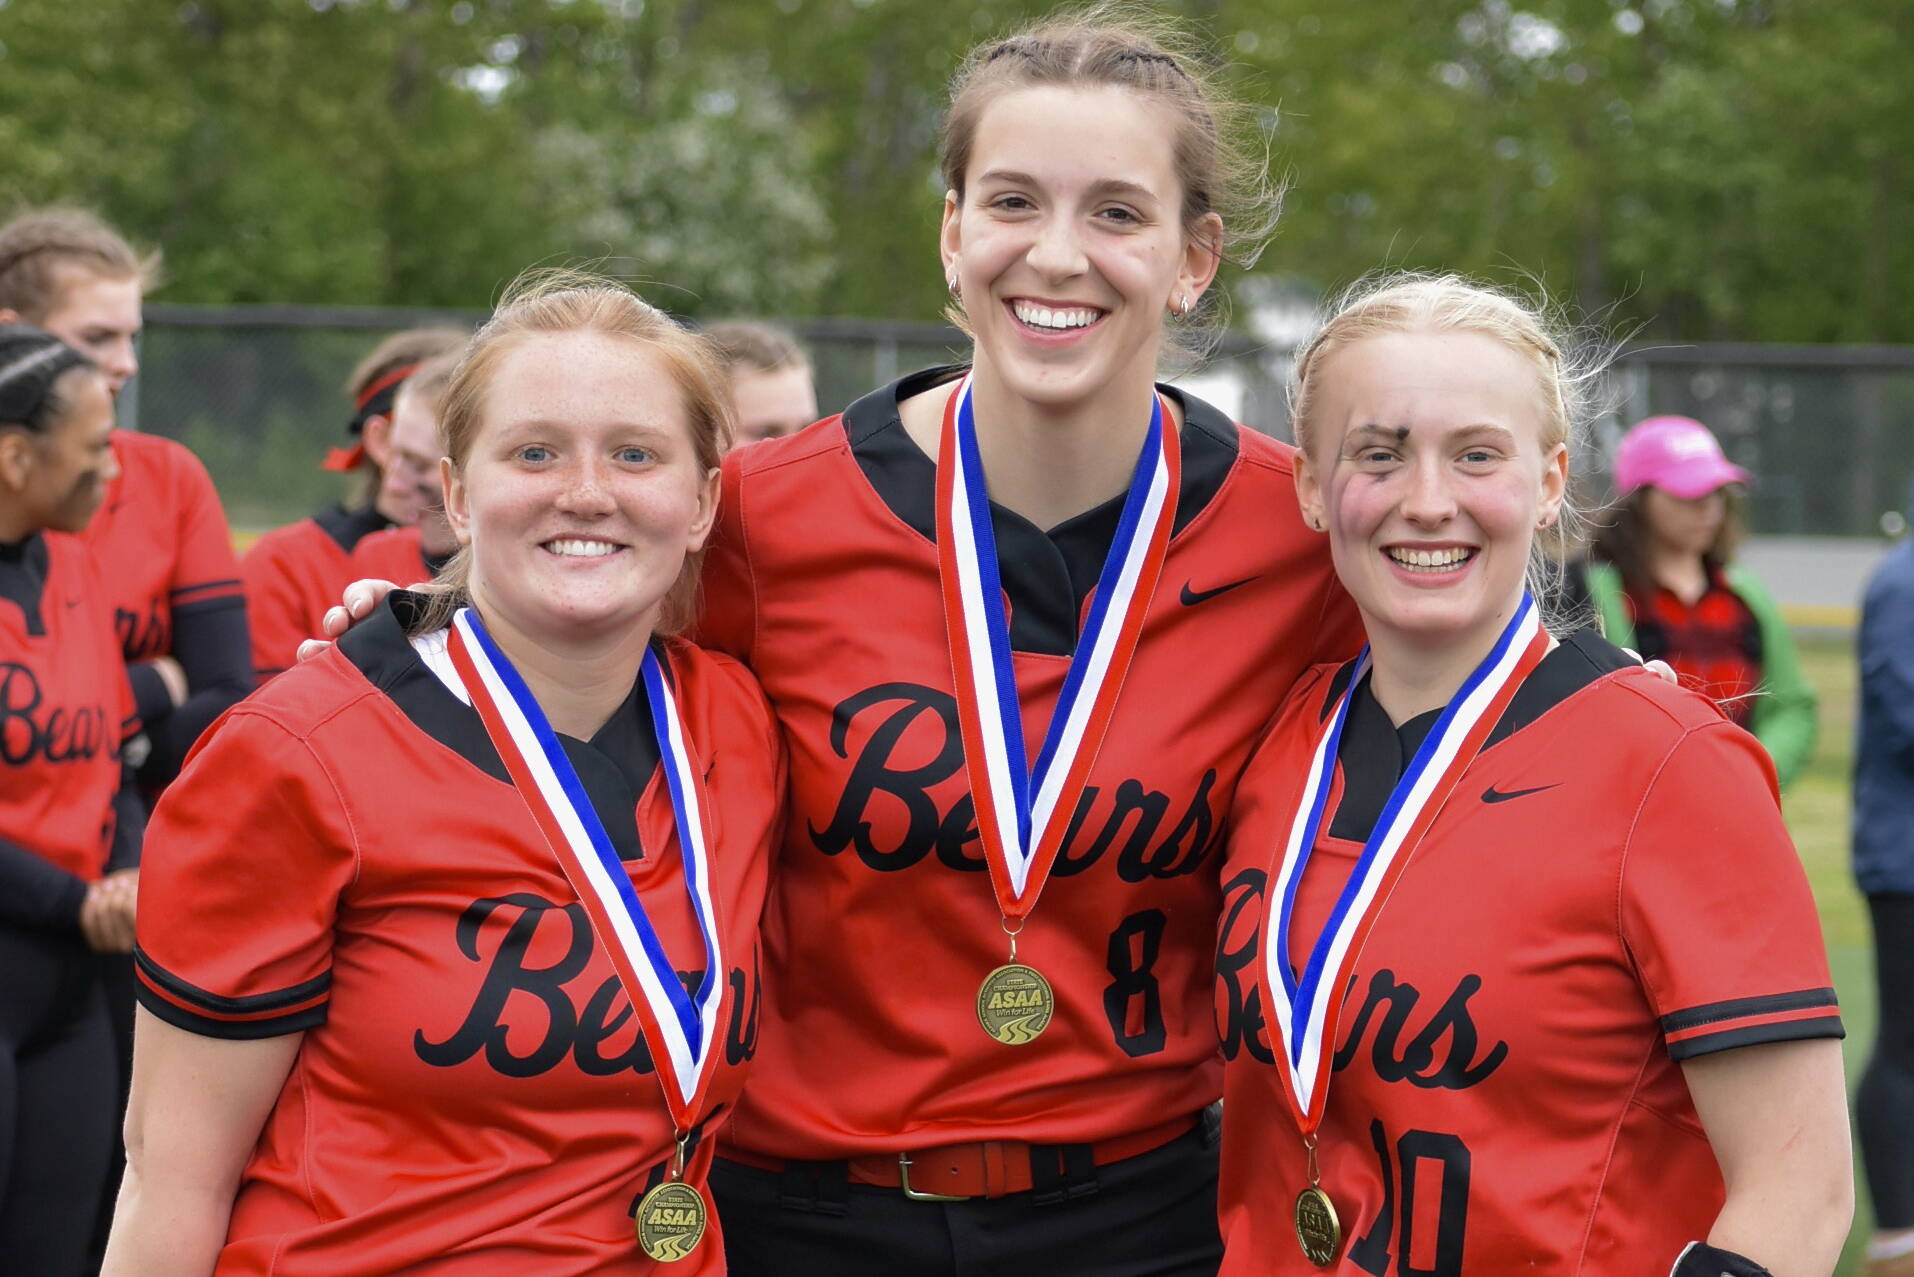 JDHS senior Mariah Schauwecker, junior Mila Hargrave and senior Anna Dale were selected to the All-State Tournament team Saturday at the ASAA Division II State Softball Championship at Anchorage’s Cartee Fields. (Courtesy Photo)